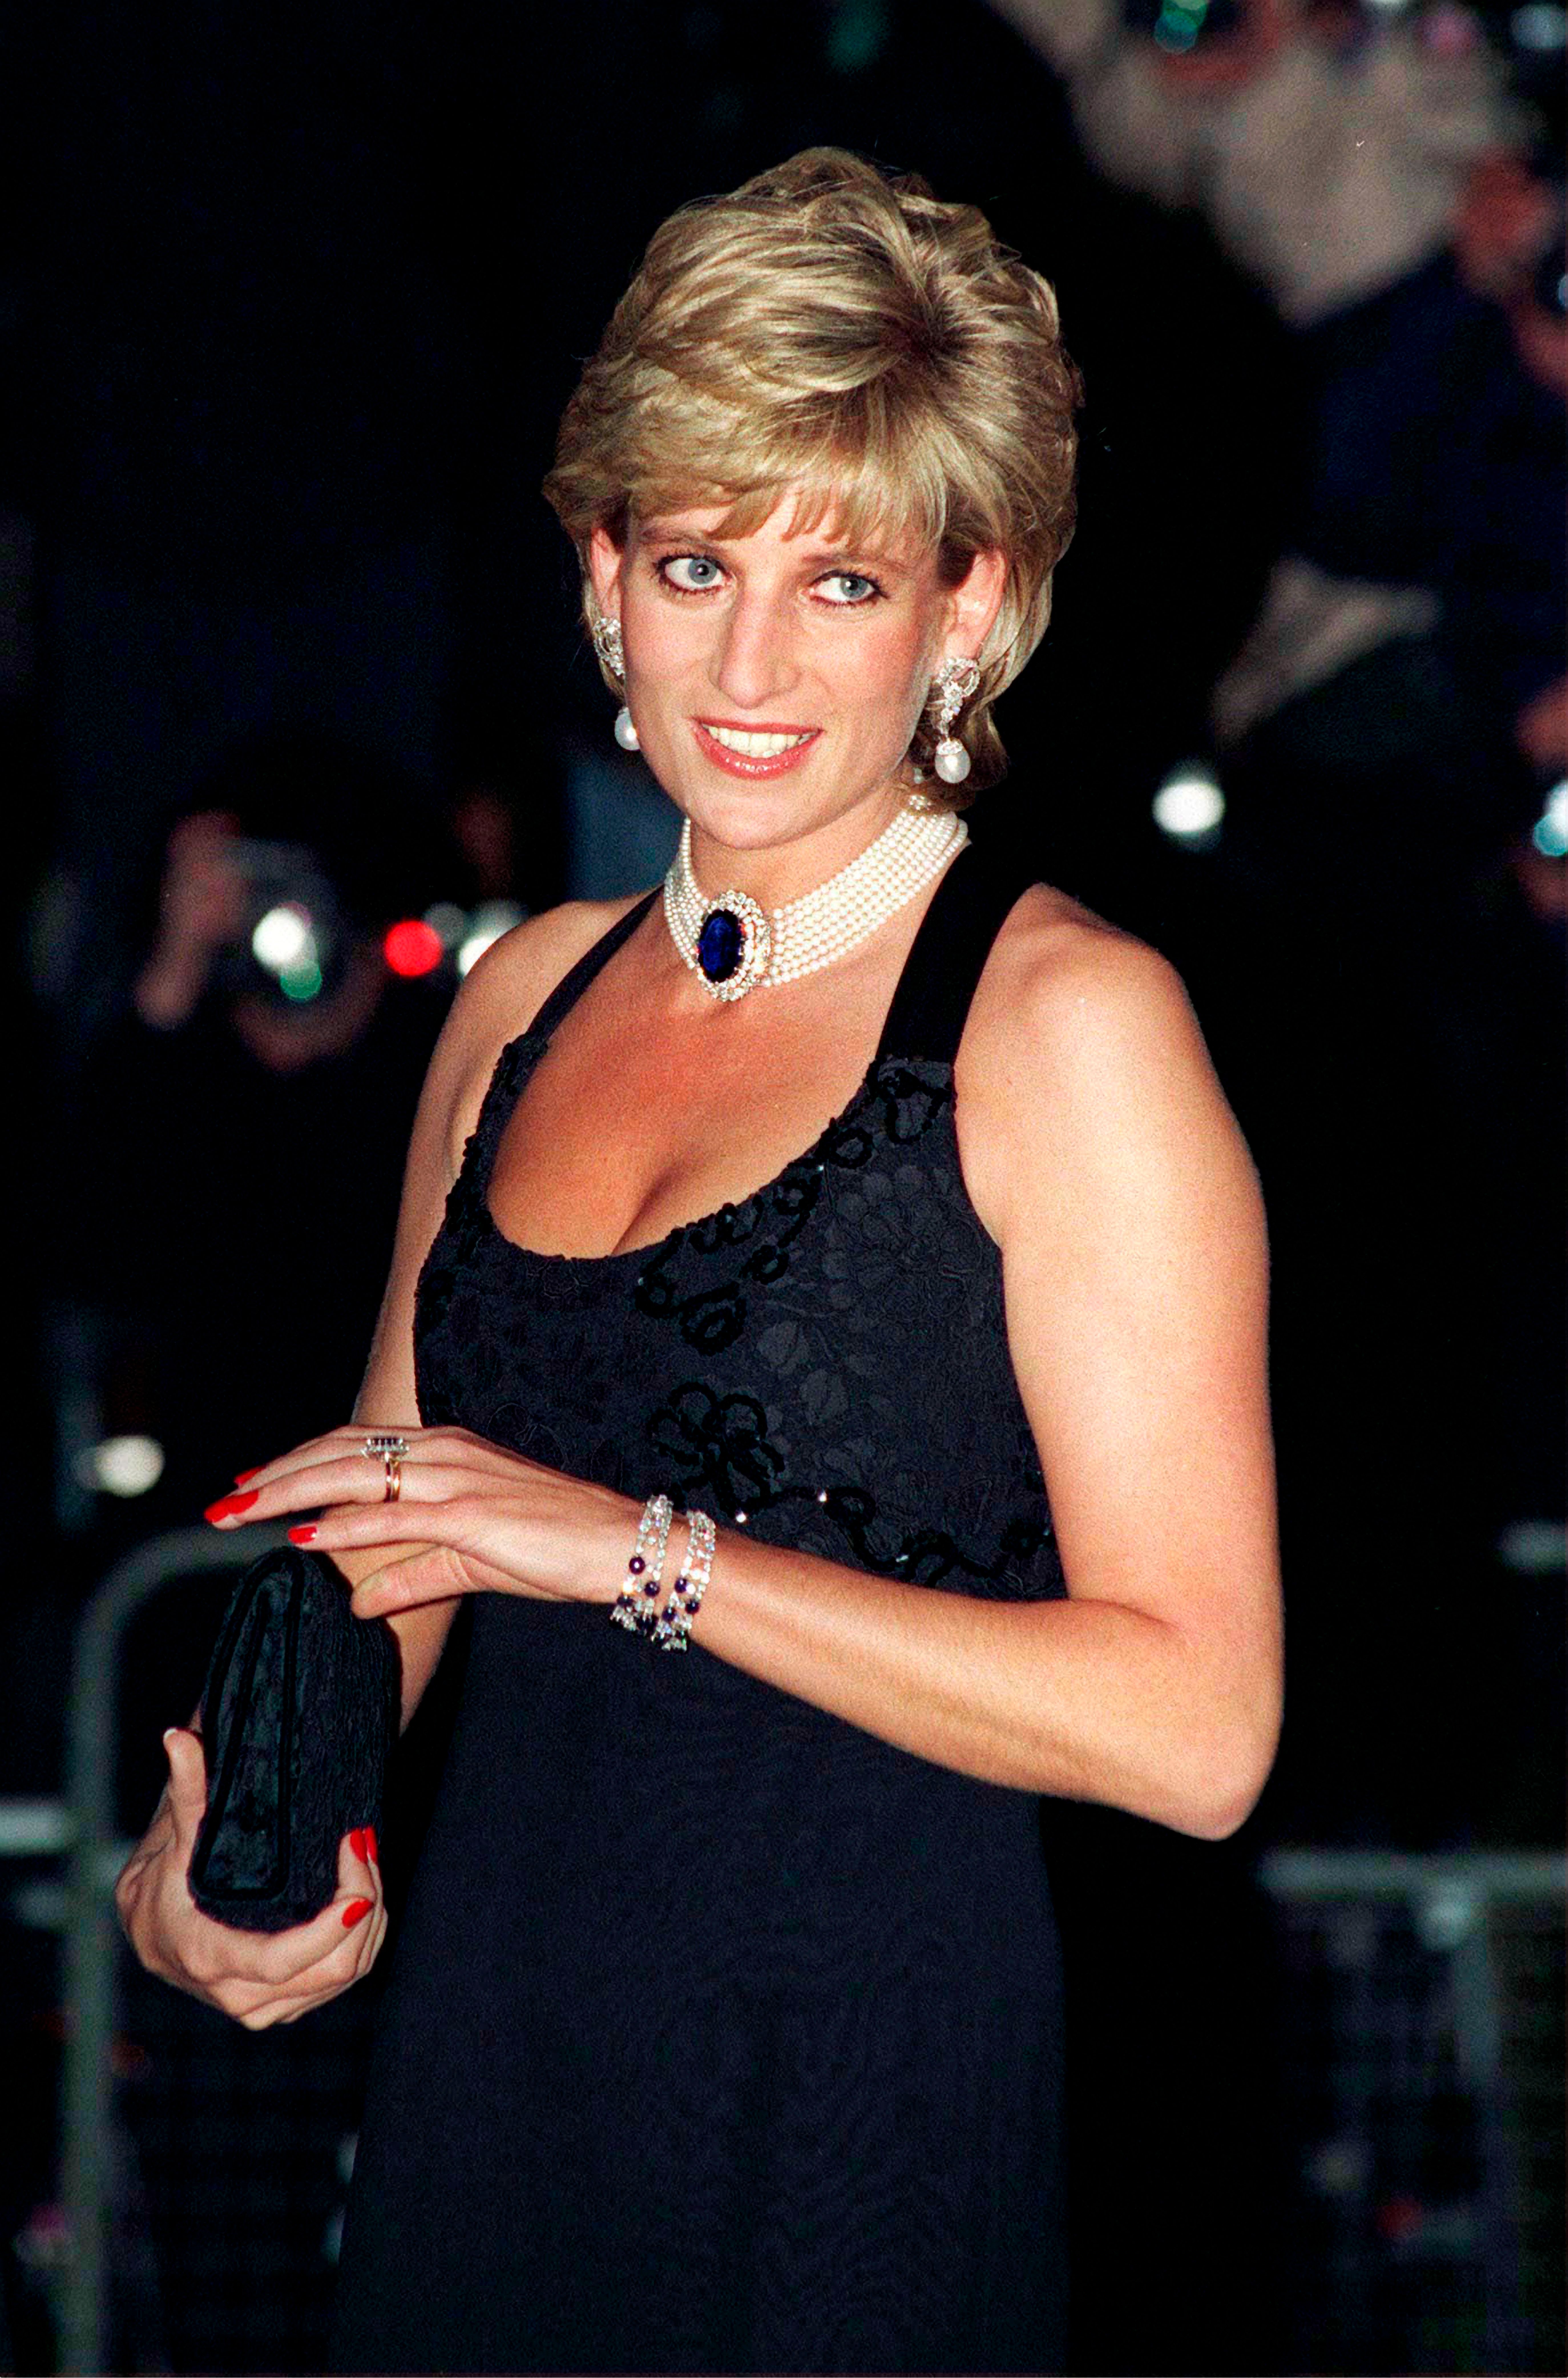 Diana, Princess Of Wales, at the gala for Aid Of Cancer Research in London in 1995 | Source: Getty Images